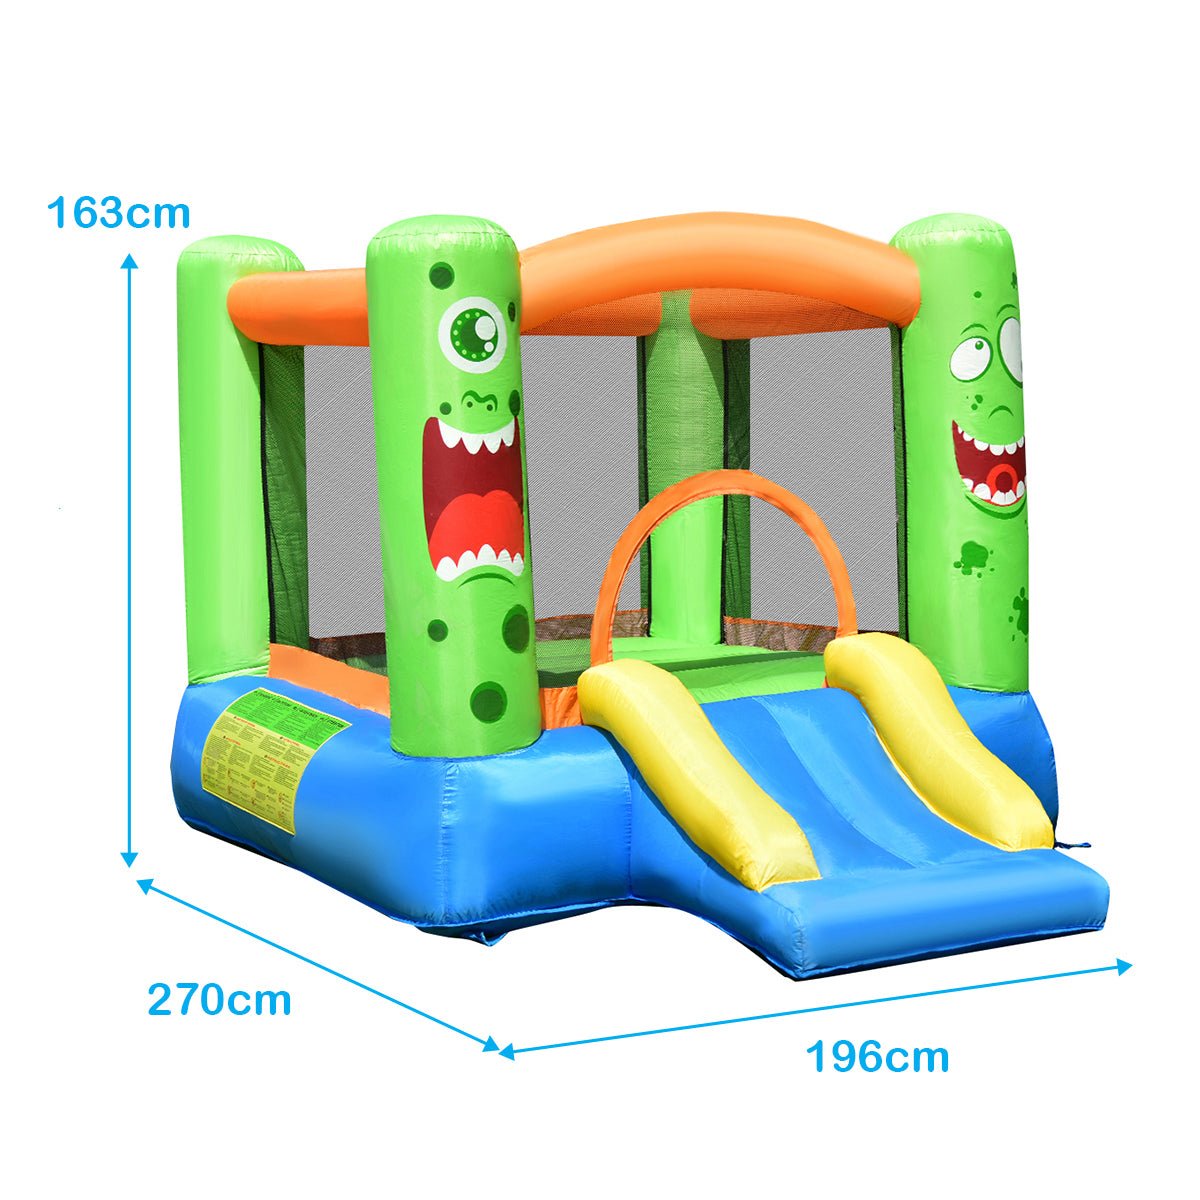 Inflatable Play Structure - Bounce, Slide, Basketball, and Adventure